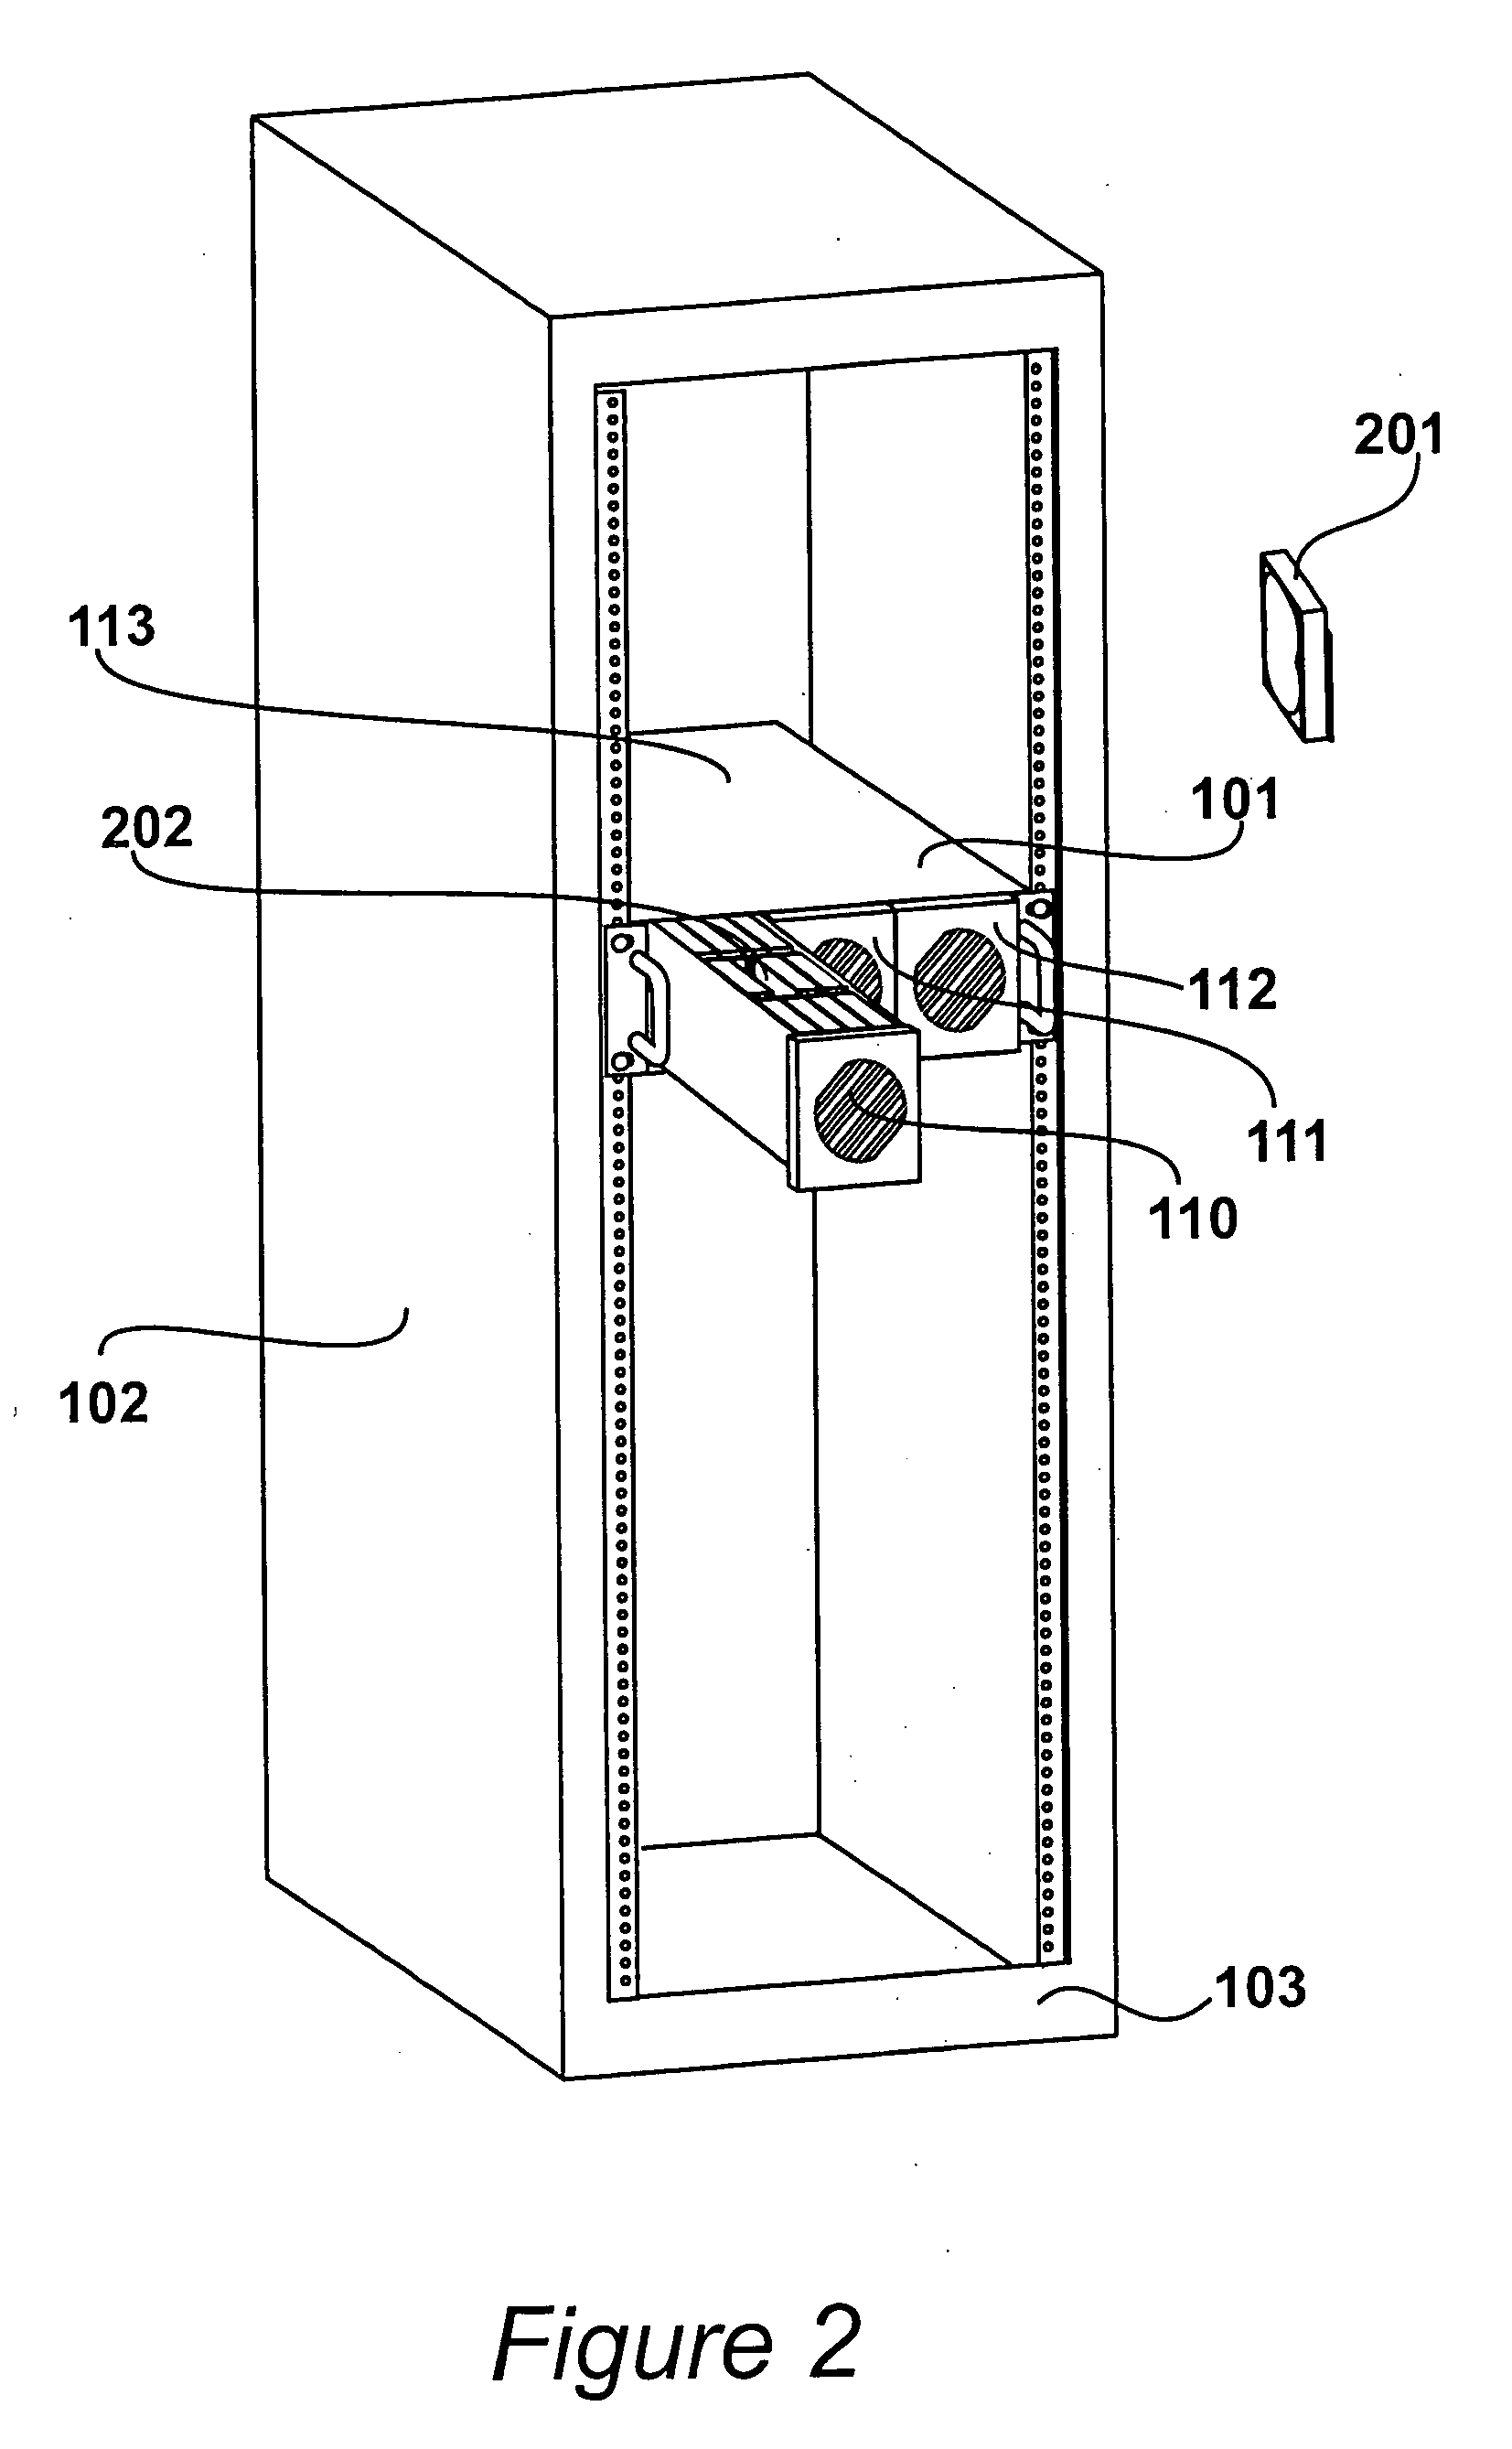 Apparatus for Storing Data